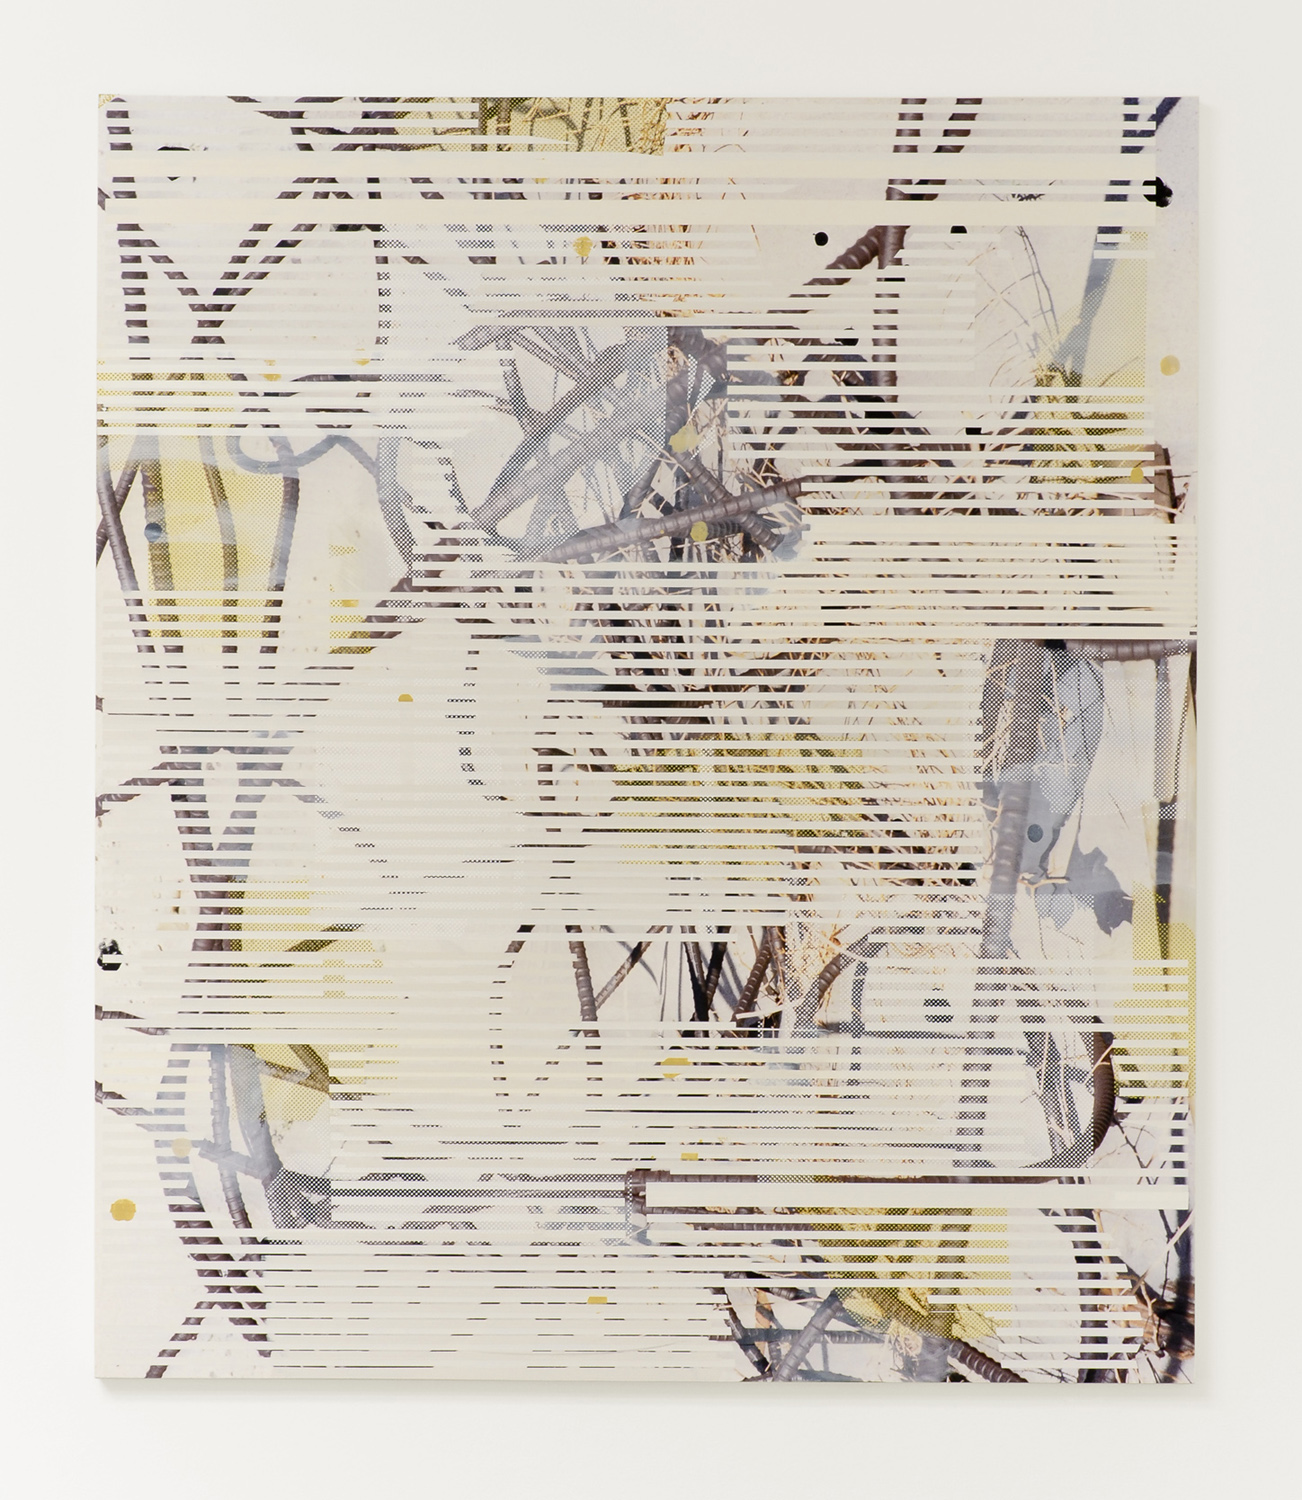  Untitled (rebar 2), 2013  Acrylic, oil and UV cured ink on canvas over panel  84 x 72 inches  213.36 x 182.88 cm       